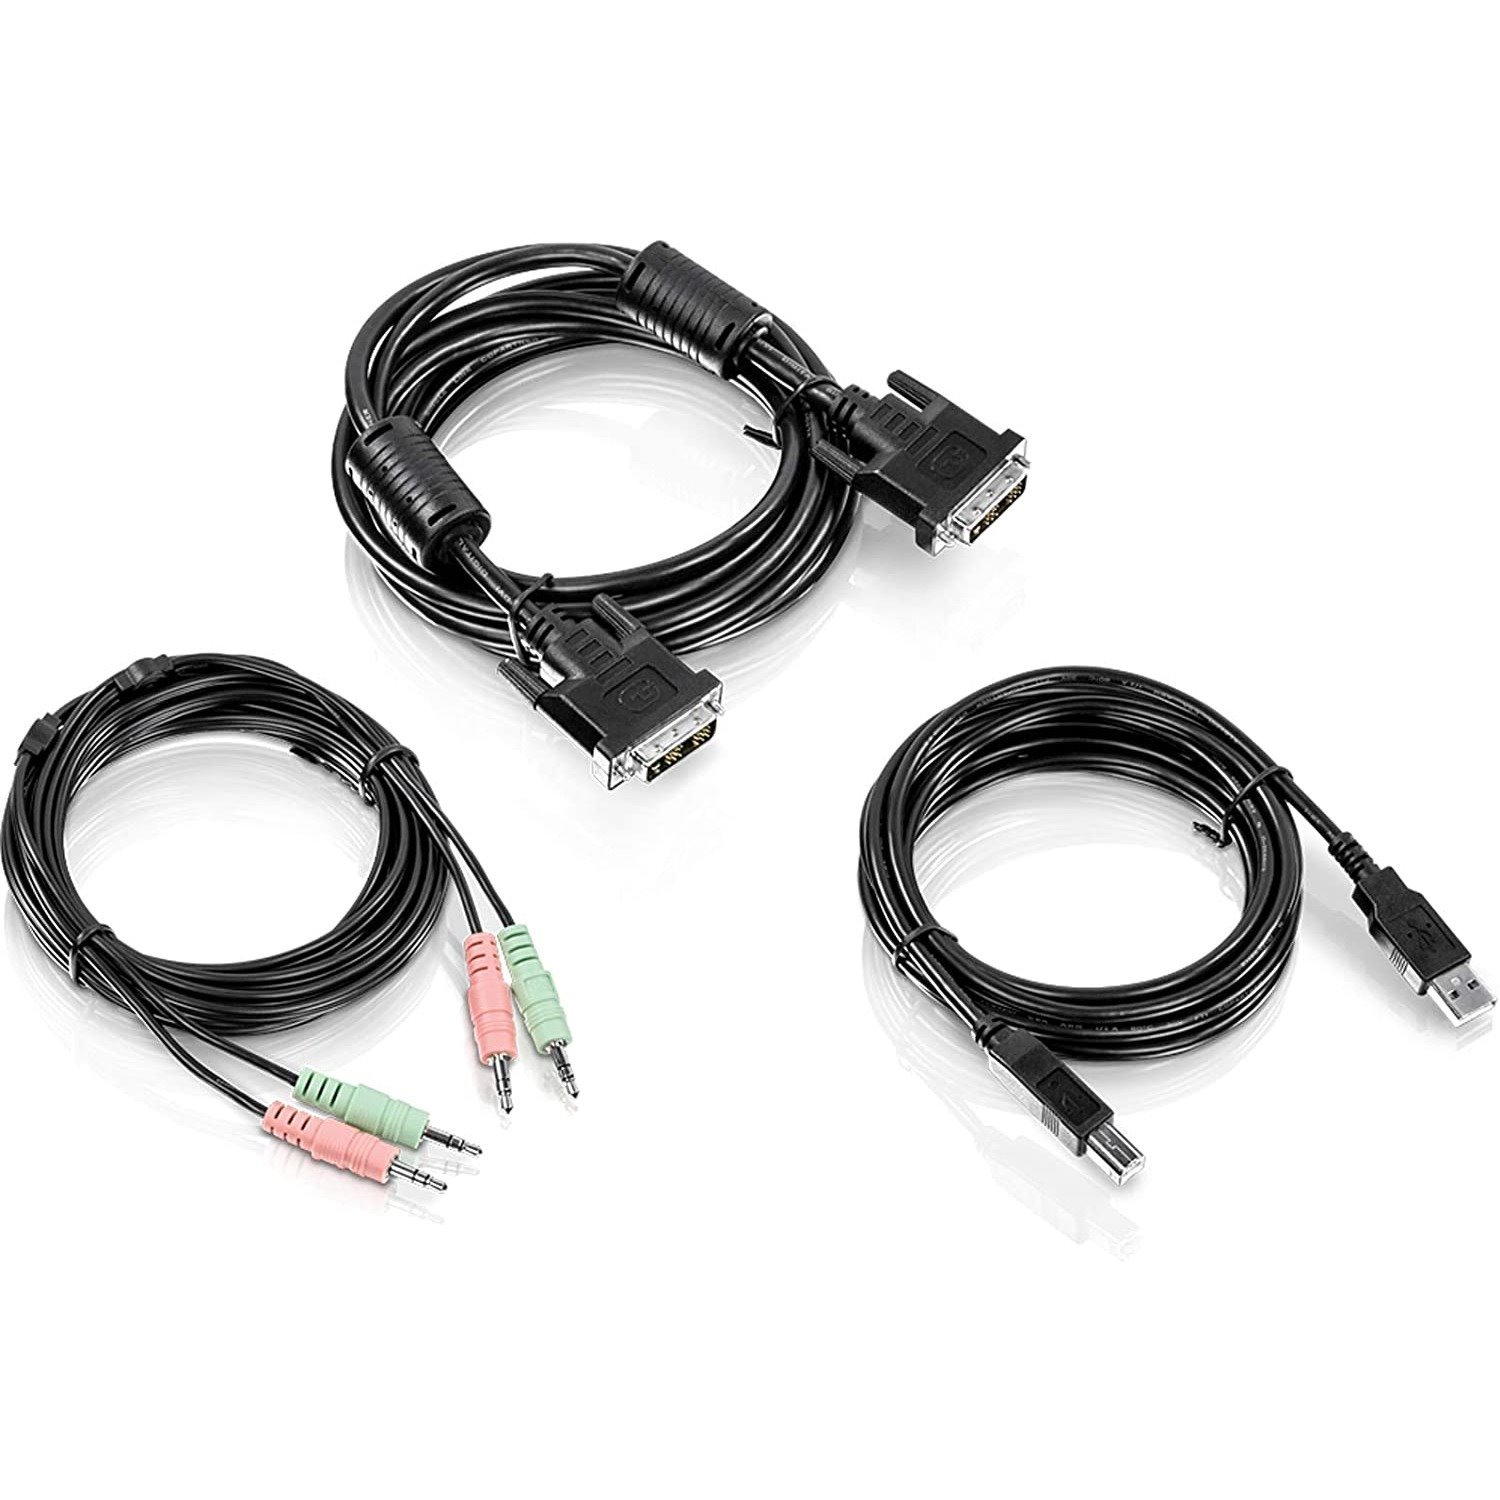 TRENDnet 10 ft. DVI-I, USB, and Audio KVM Cable Kit, Connect a DVI Computer to the TRENDnet TK-232DV KVM Switch, USB Mouse/Keyboard, DVI-I, & 3.5mm Audio Connections, TK-CD10